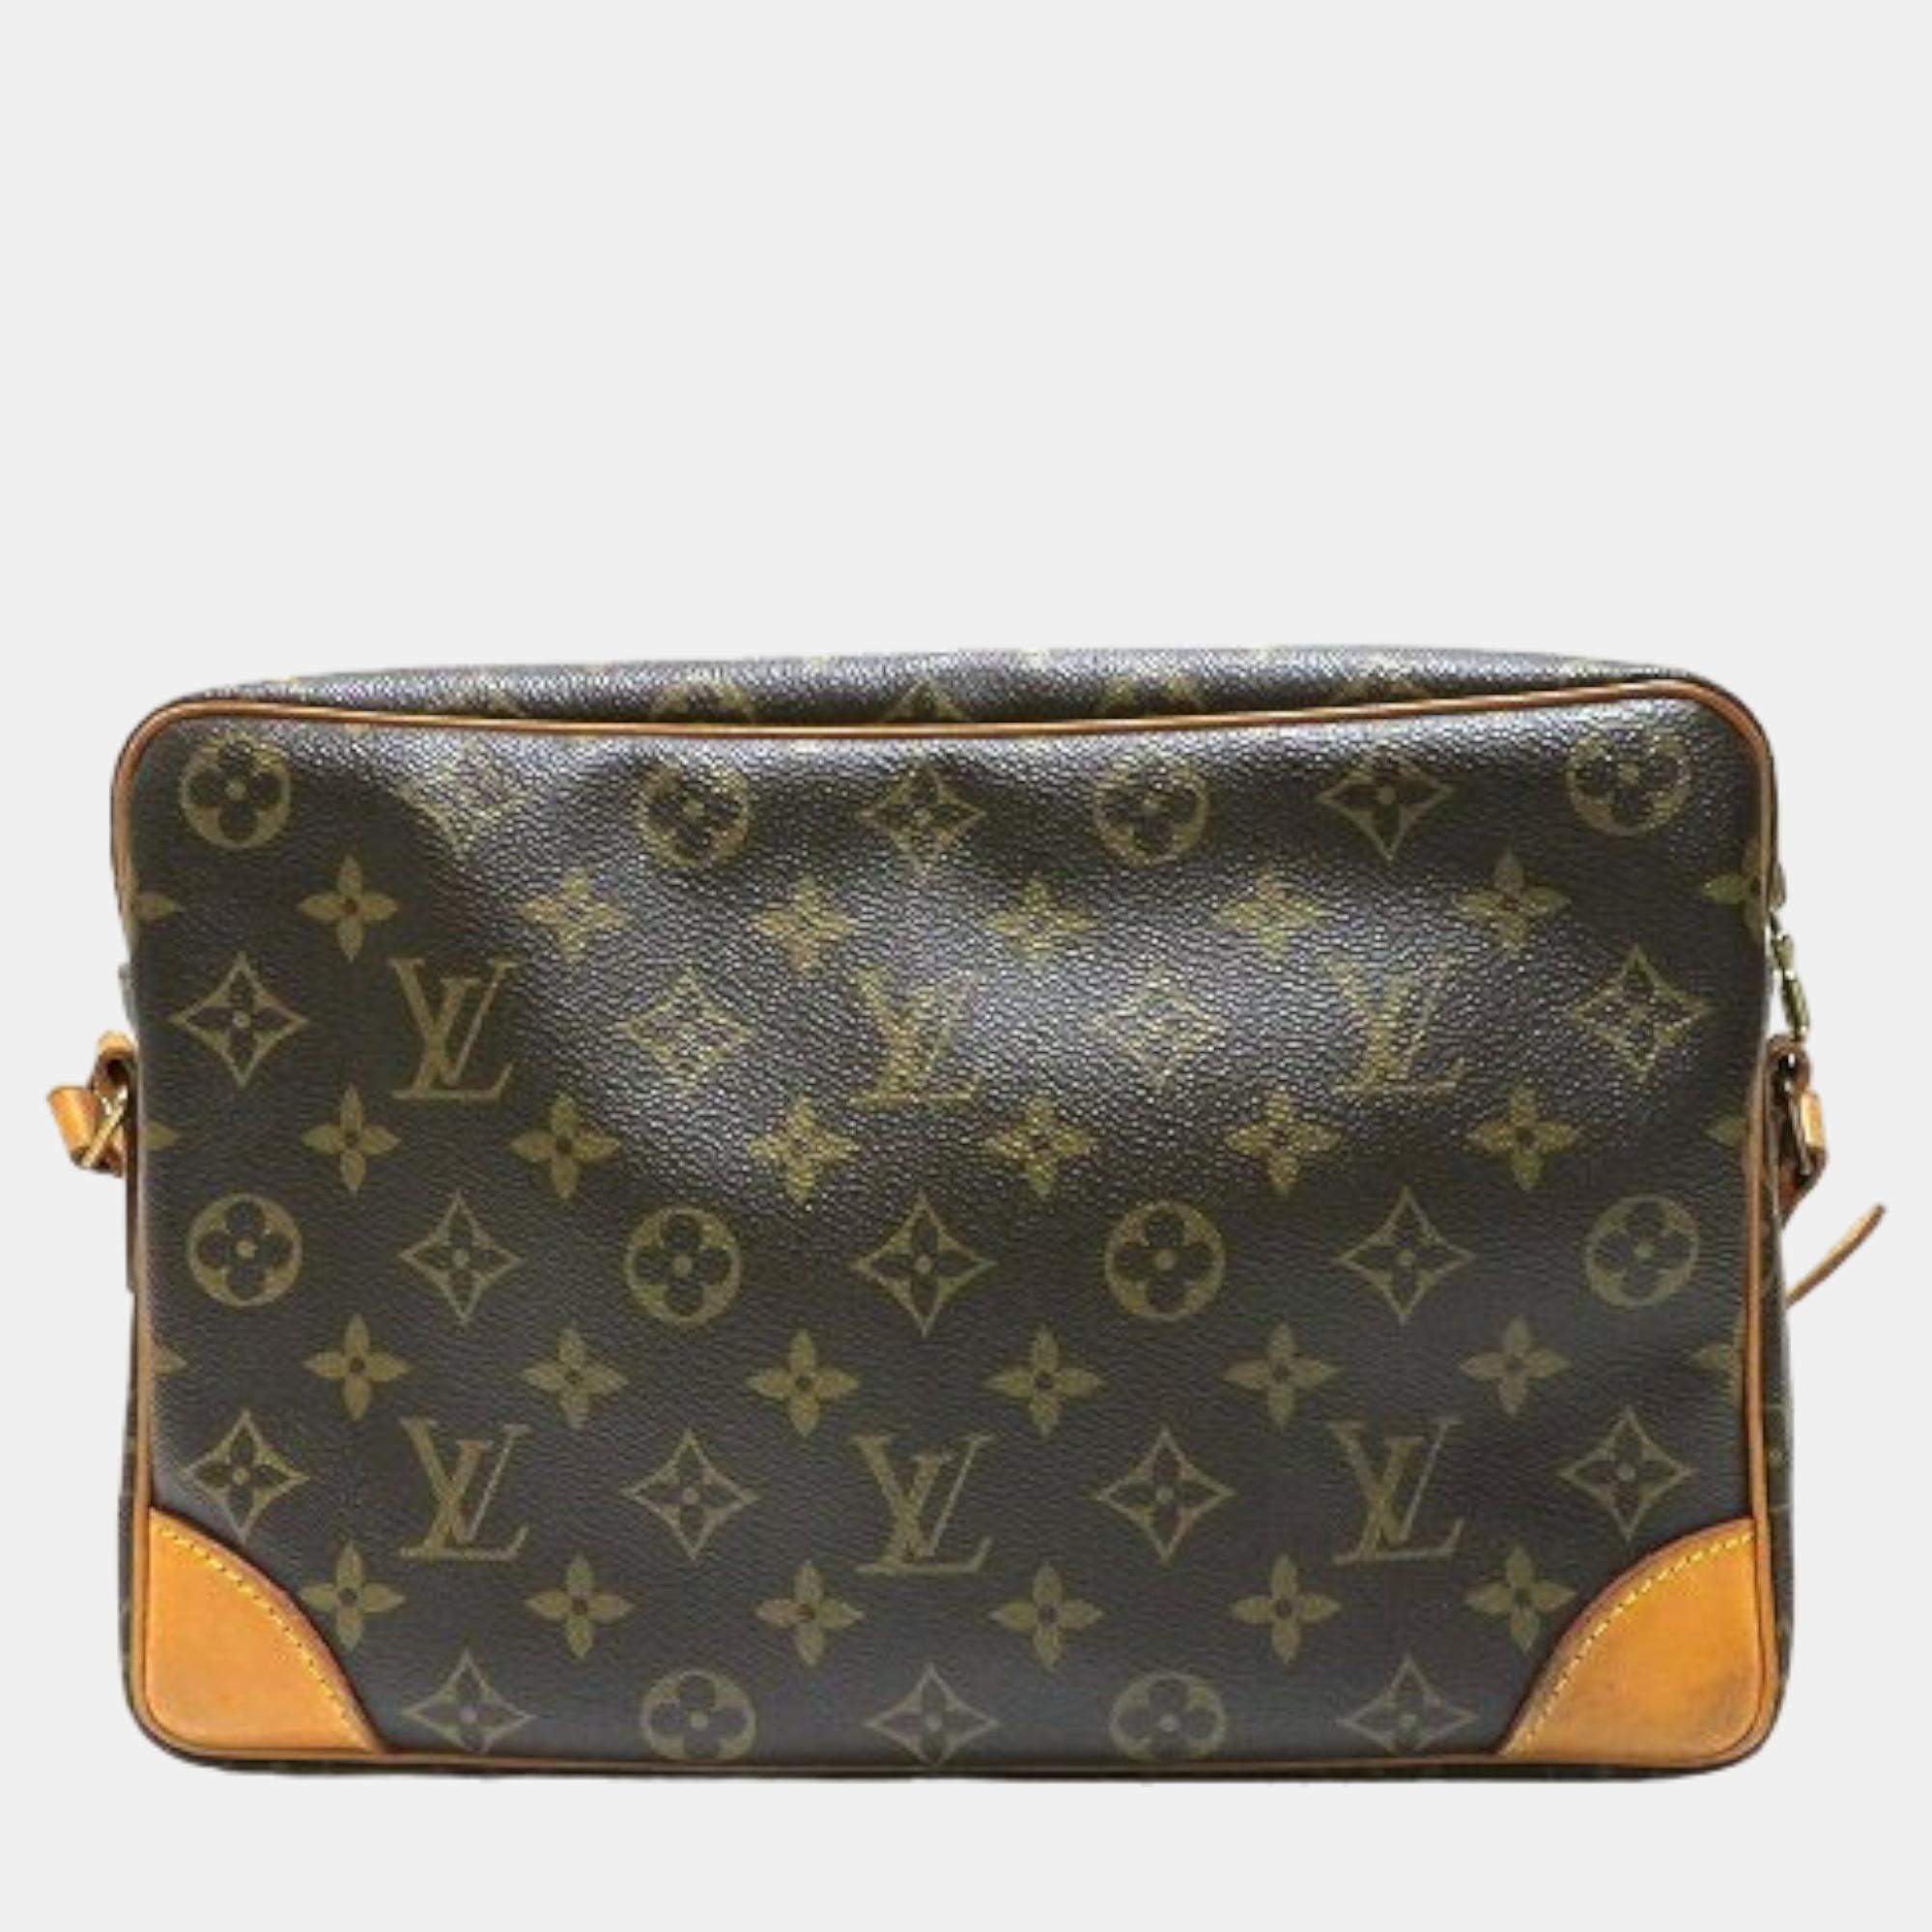 Shop for Louis Vuitton Sienna Brown Epi Leather Speedy 30 cm Satchel Bag -  Shipped from USA